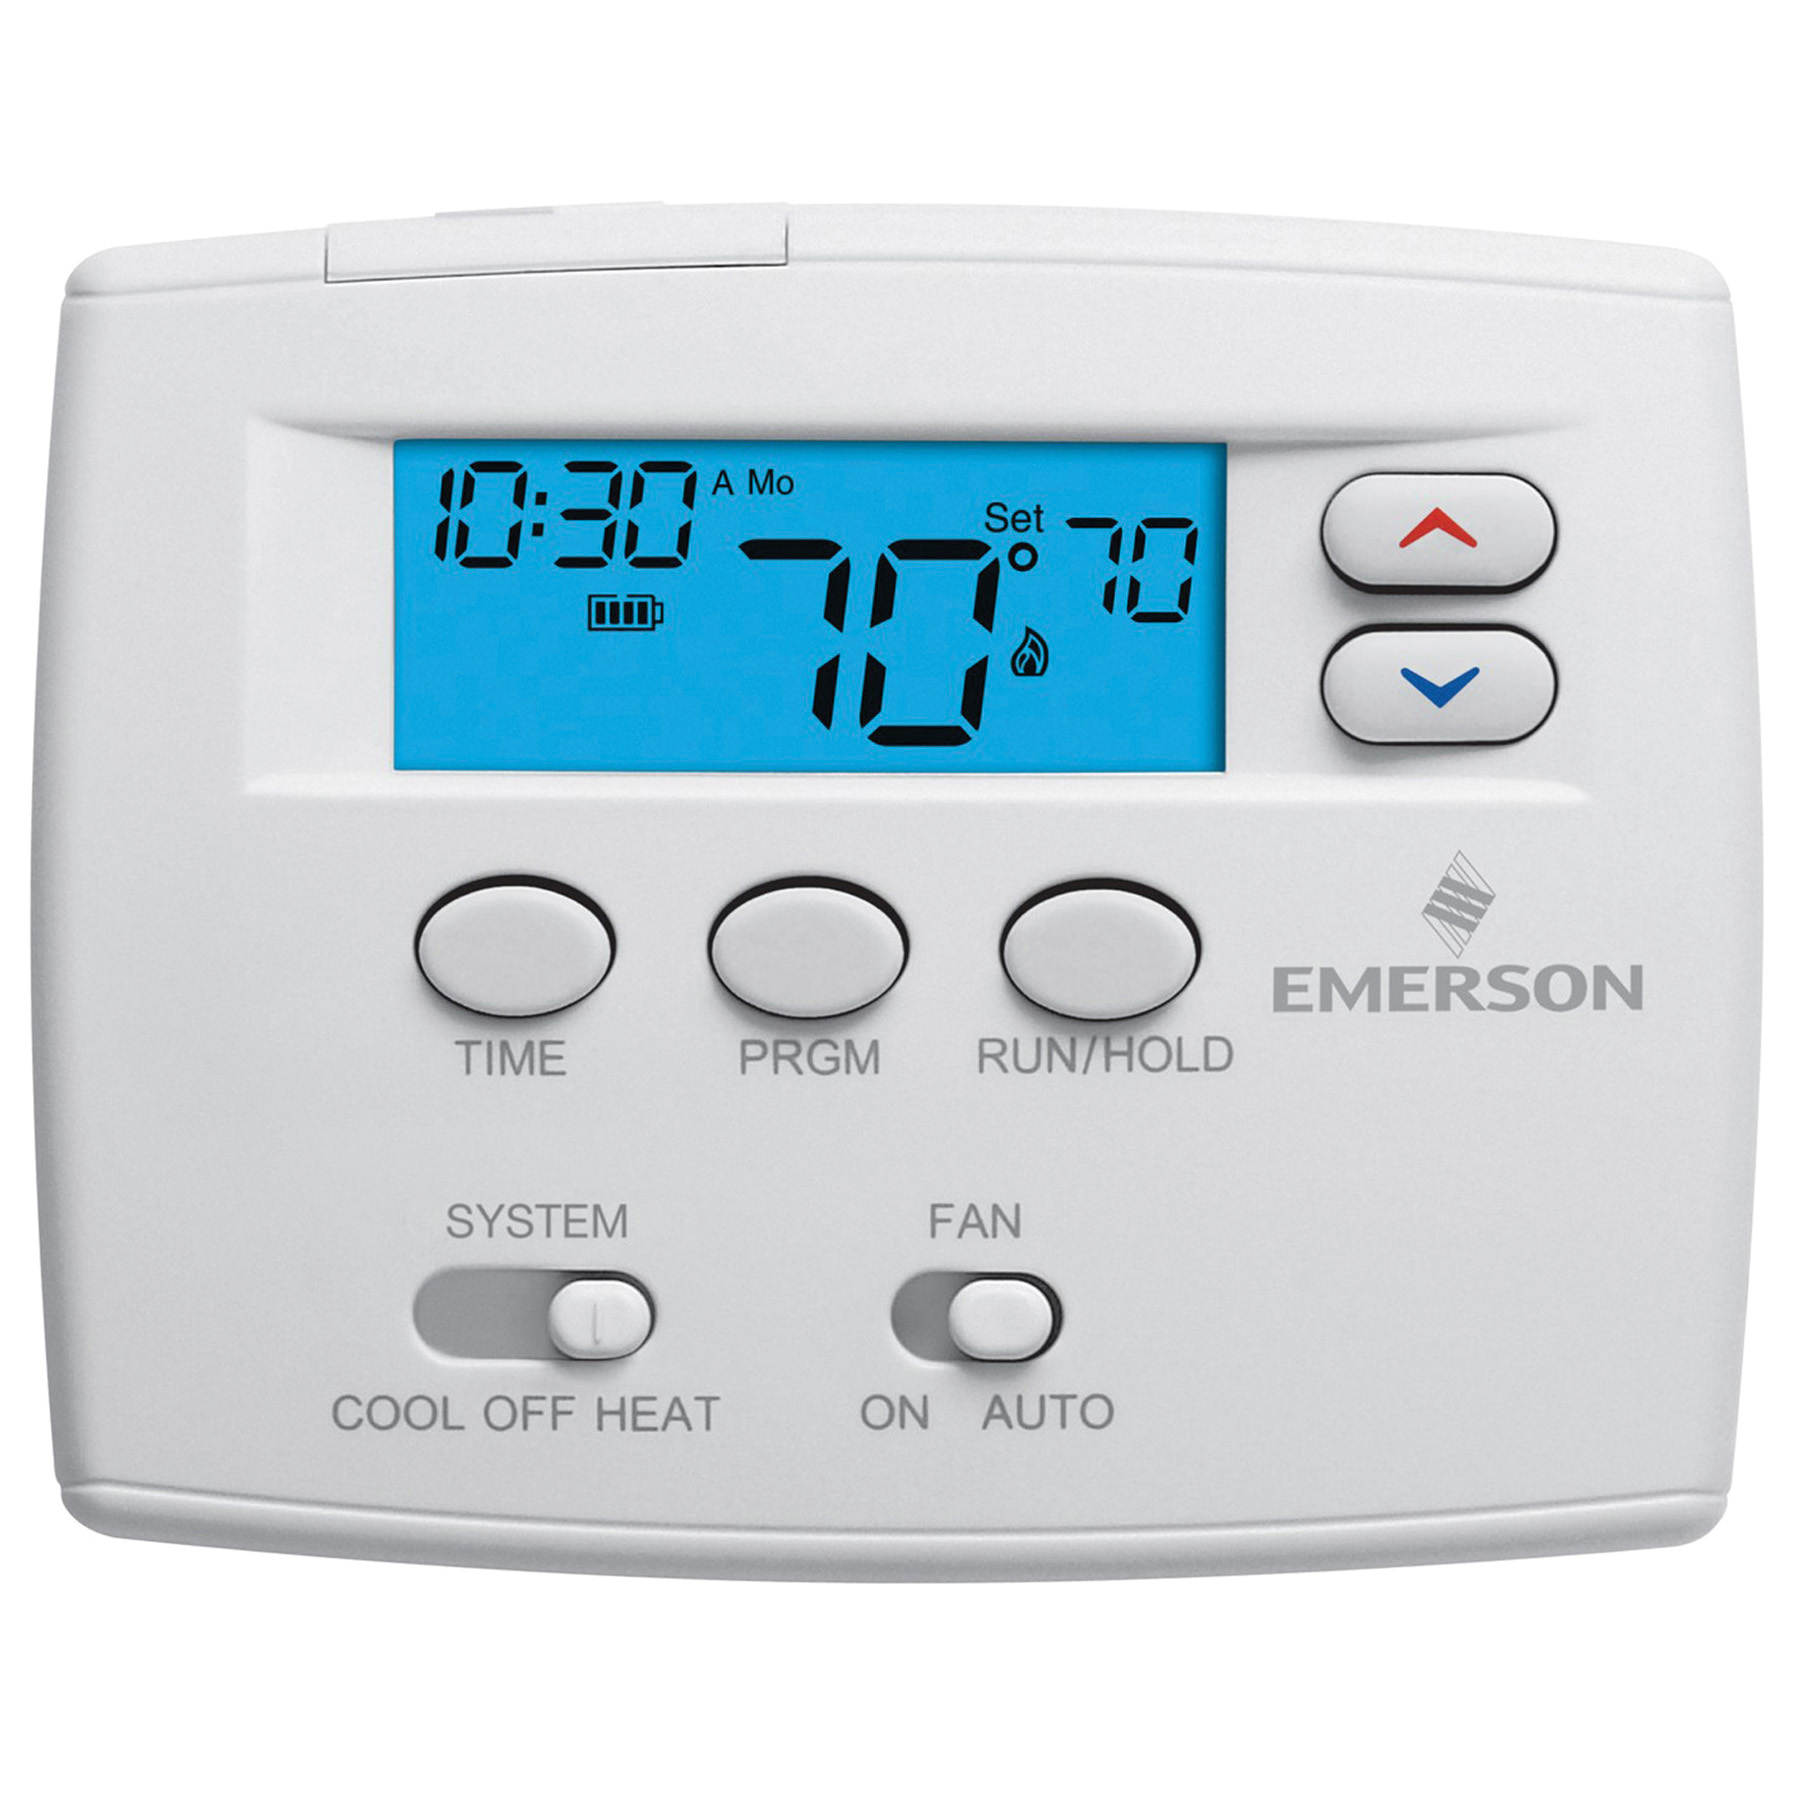 White-Rodgers™ 1F80-0261 Thermostat, 0 - 30 VAC, 0.05 - 1.5 A, 5-1-1 day Program Programmability, 1 Heat/1 Cool -Stage